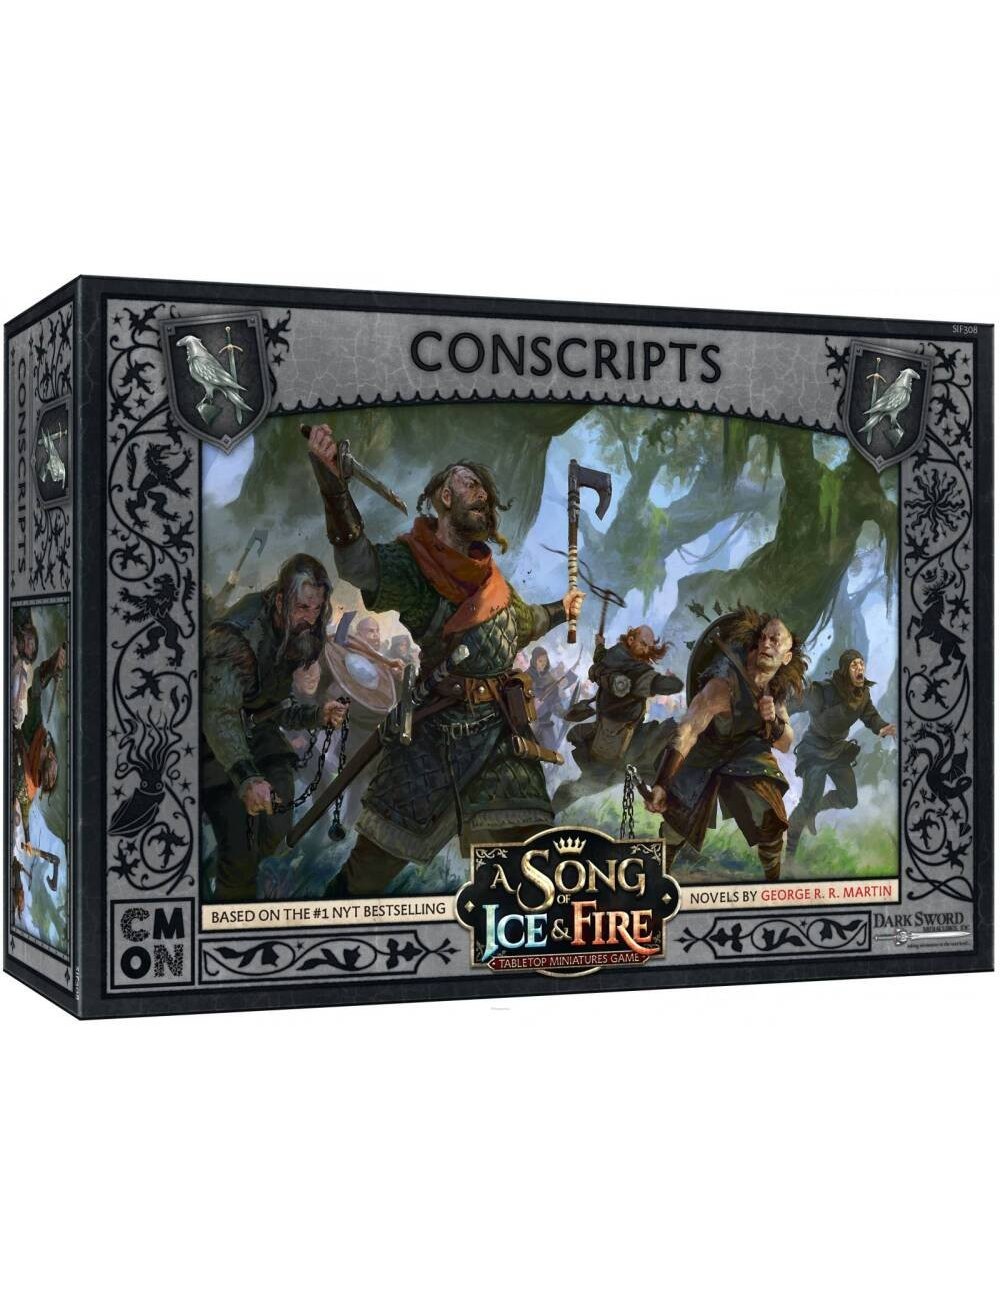 A SONG OF ICE & FIRE - Conscripts PL